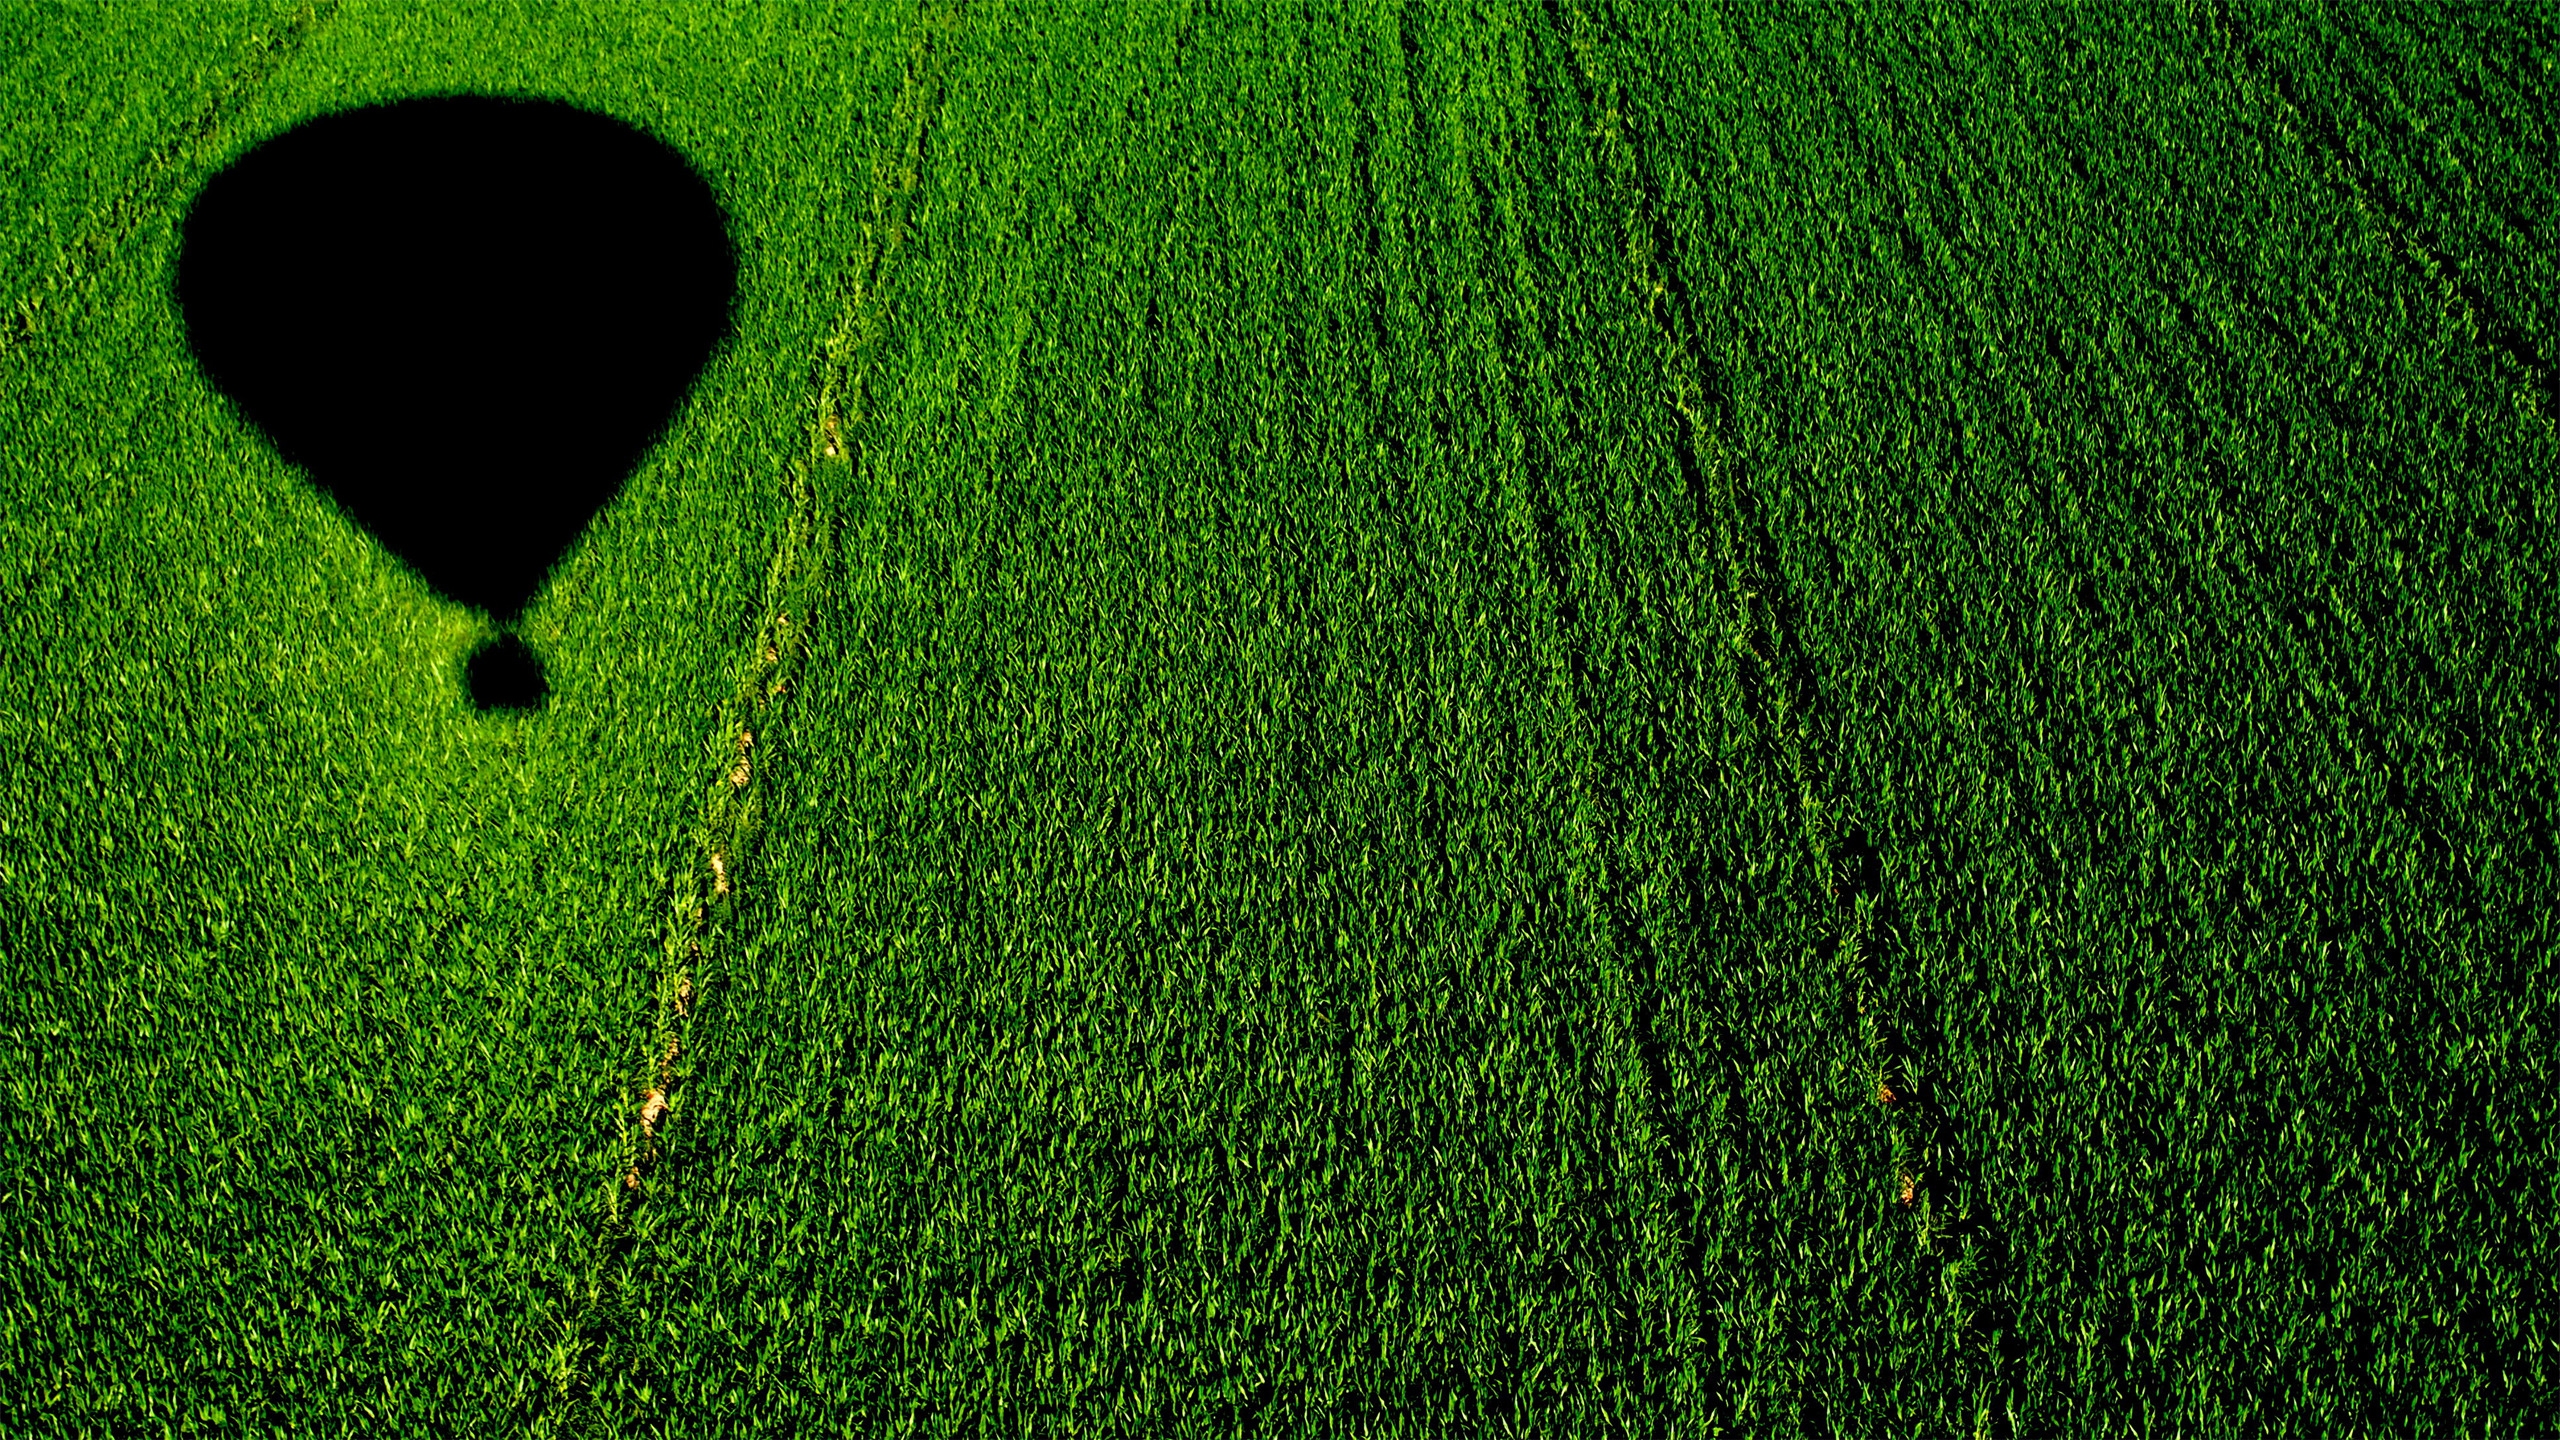 Balloon over a Cornfield for 2560x1440 HDTV resolution